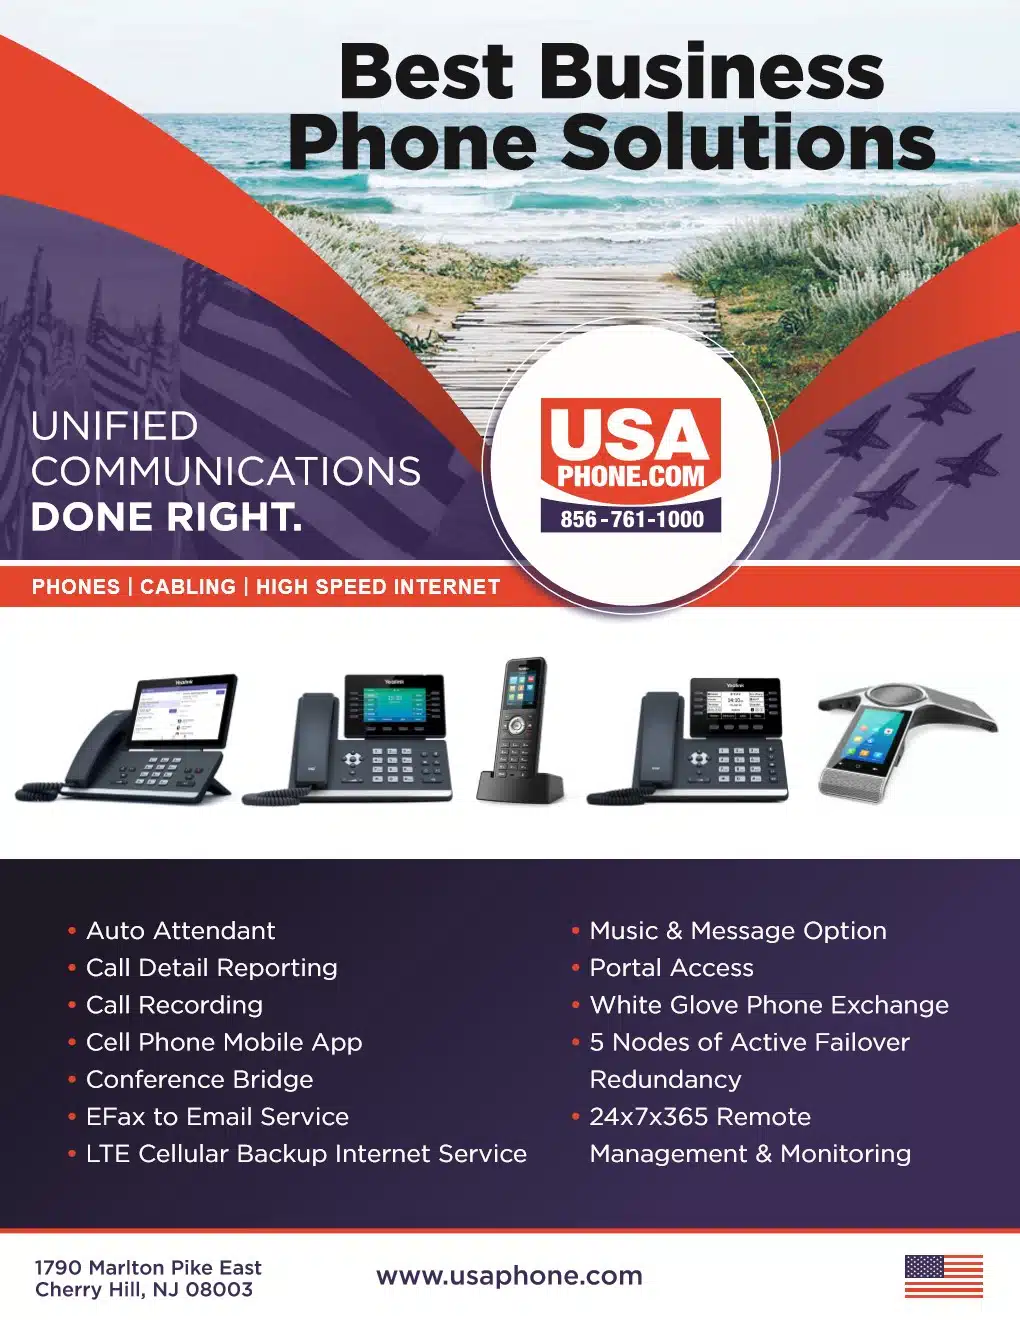 Best Business Phone Solutions